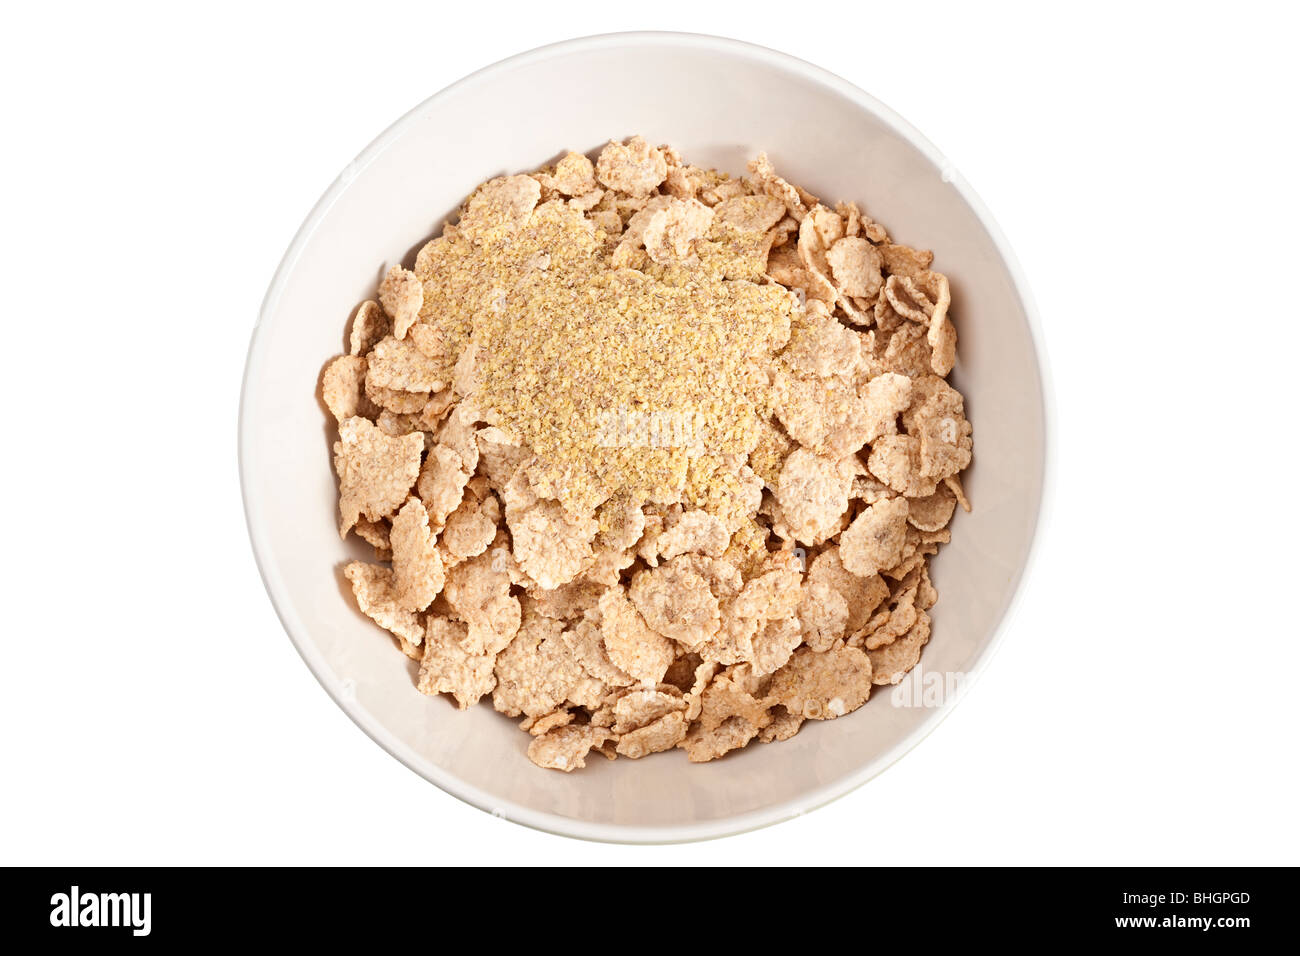 Rice and wheat breakfast cereal flakes sprinkled with wheatgerm flakes Stock Photo